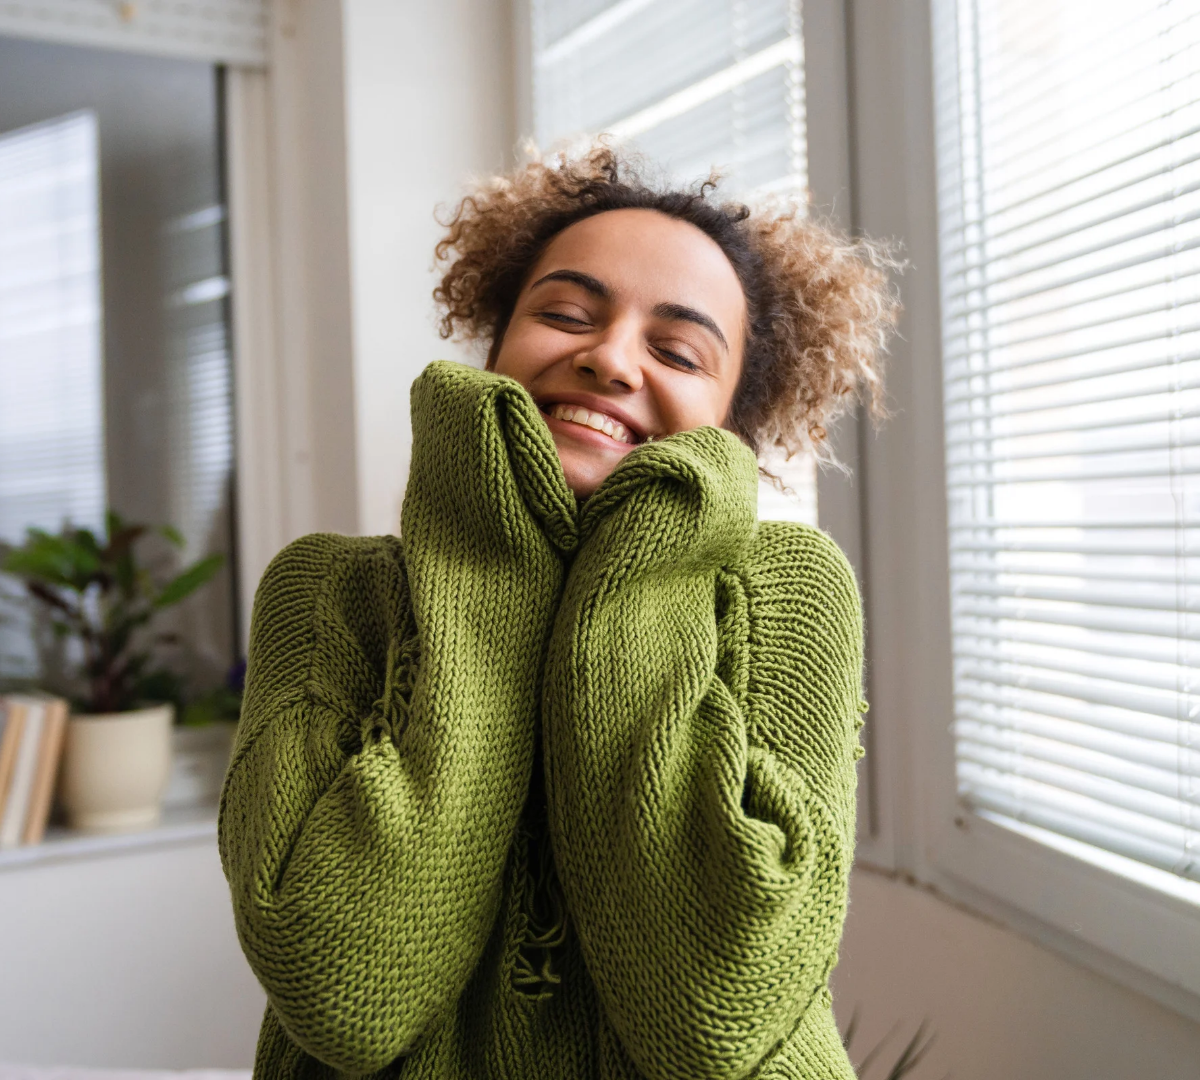 Woman is an oversized green cardigan. She looks happy and content.